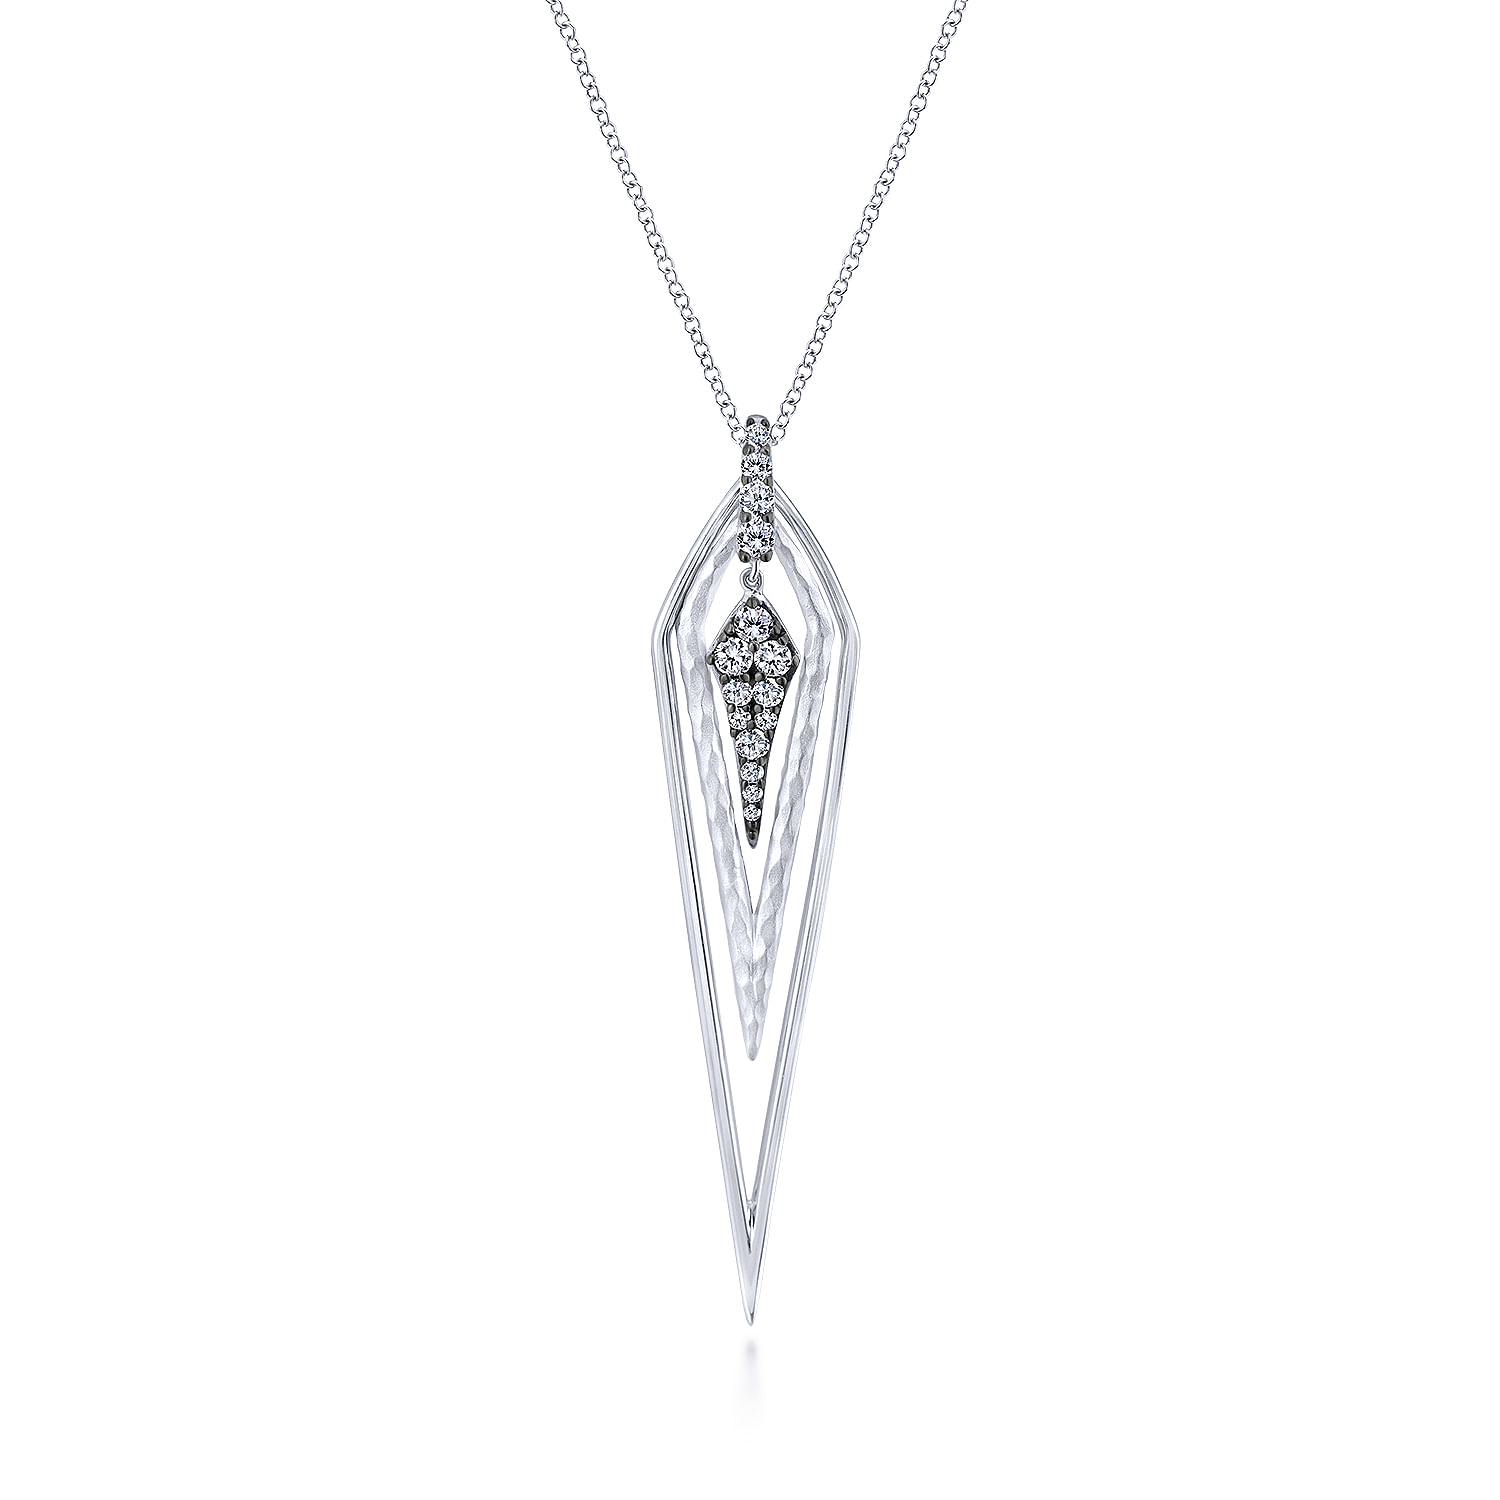 25 inch 925 Sterling Silver White Sapphire Layered Kite Necklace